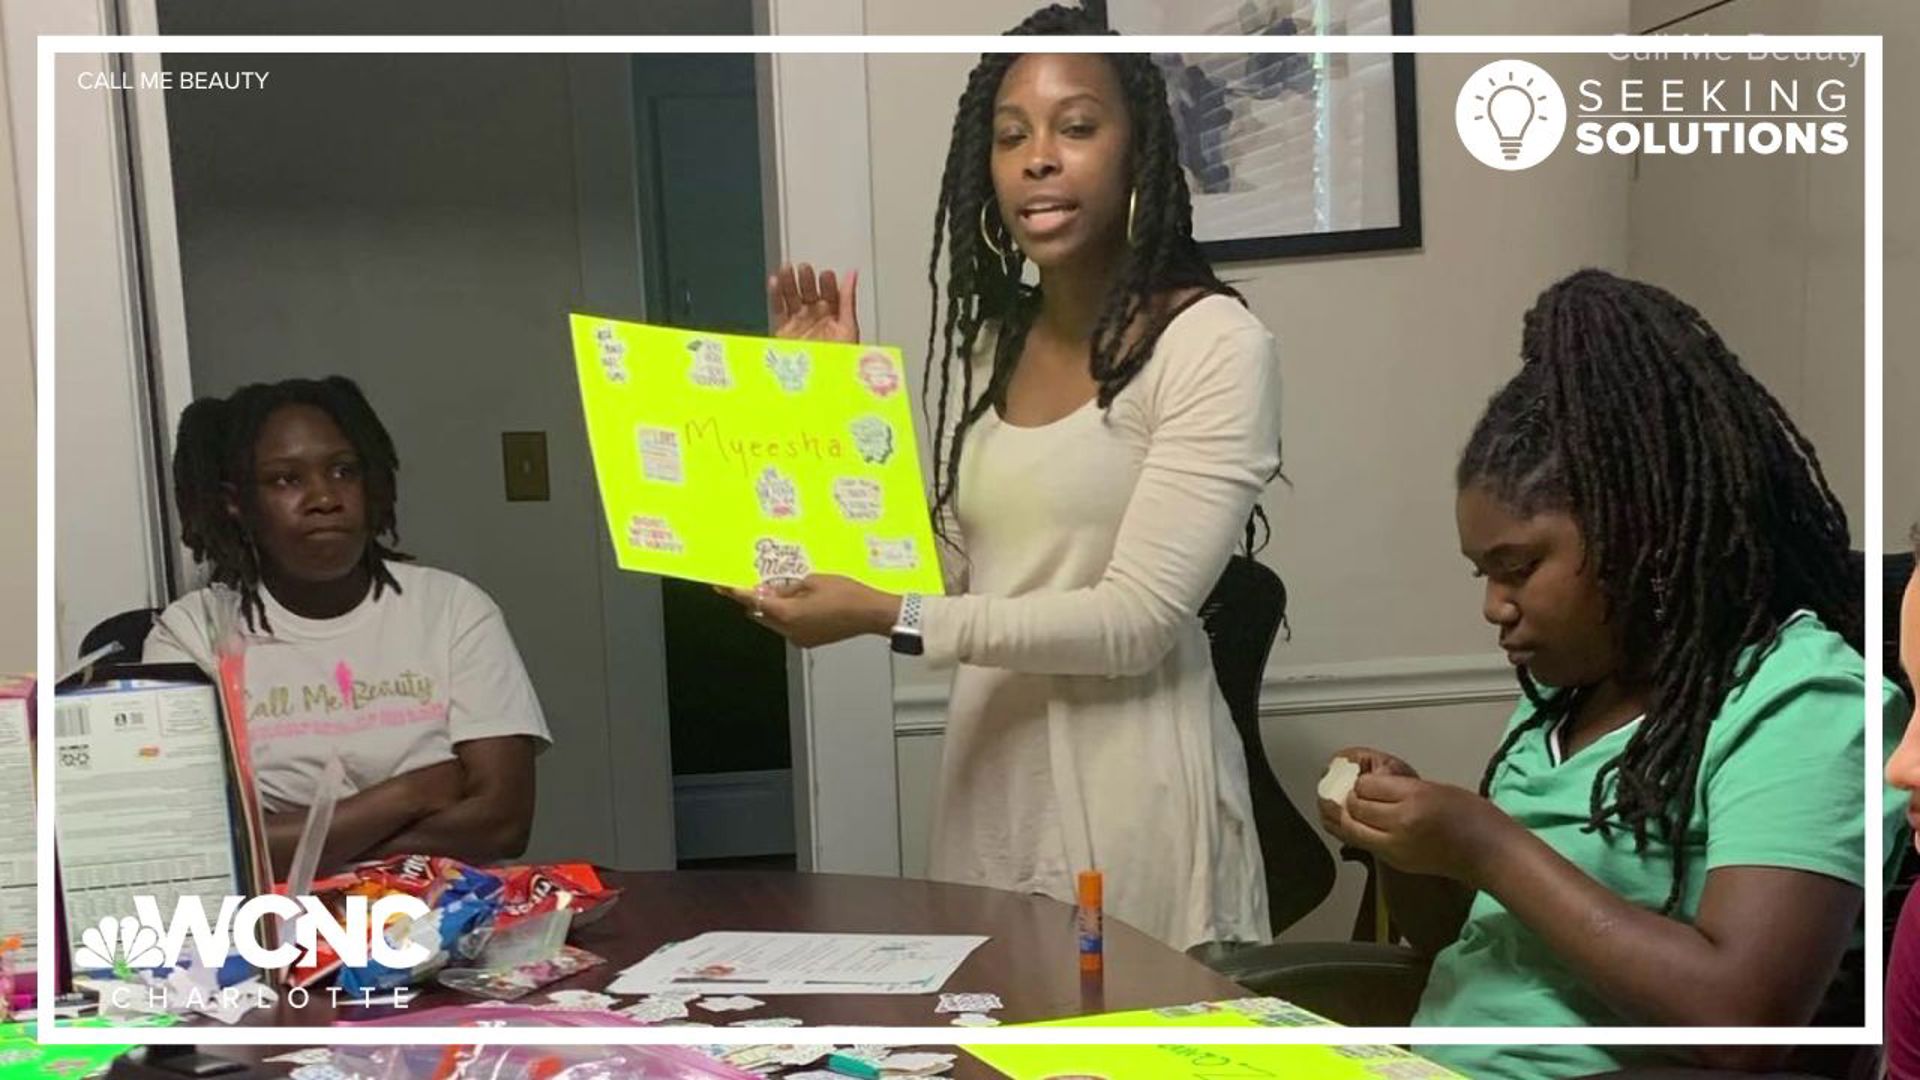 A Lancaster nonprofit is seeking solutions, helping young girls see their inner beauty and realize their true potential through mentorship.